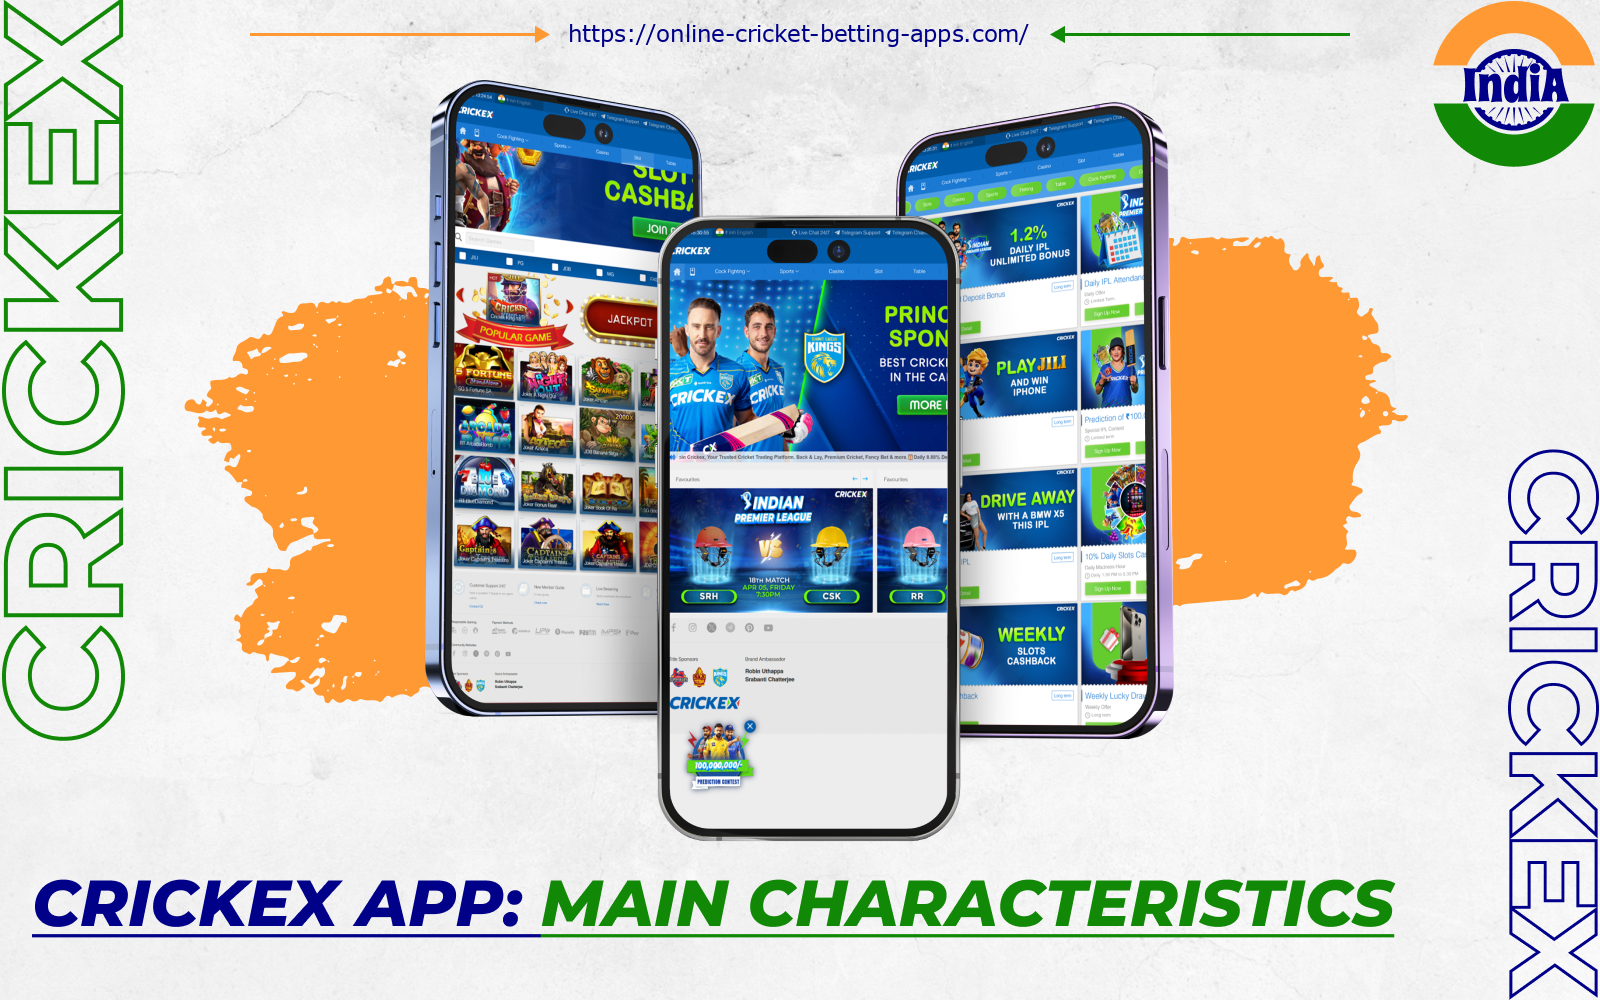 The Crickex app is highly optimized and works as fast as possible, from which it has gained widespread popularity among Indian users